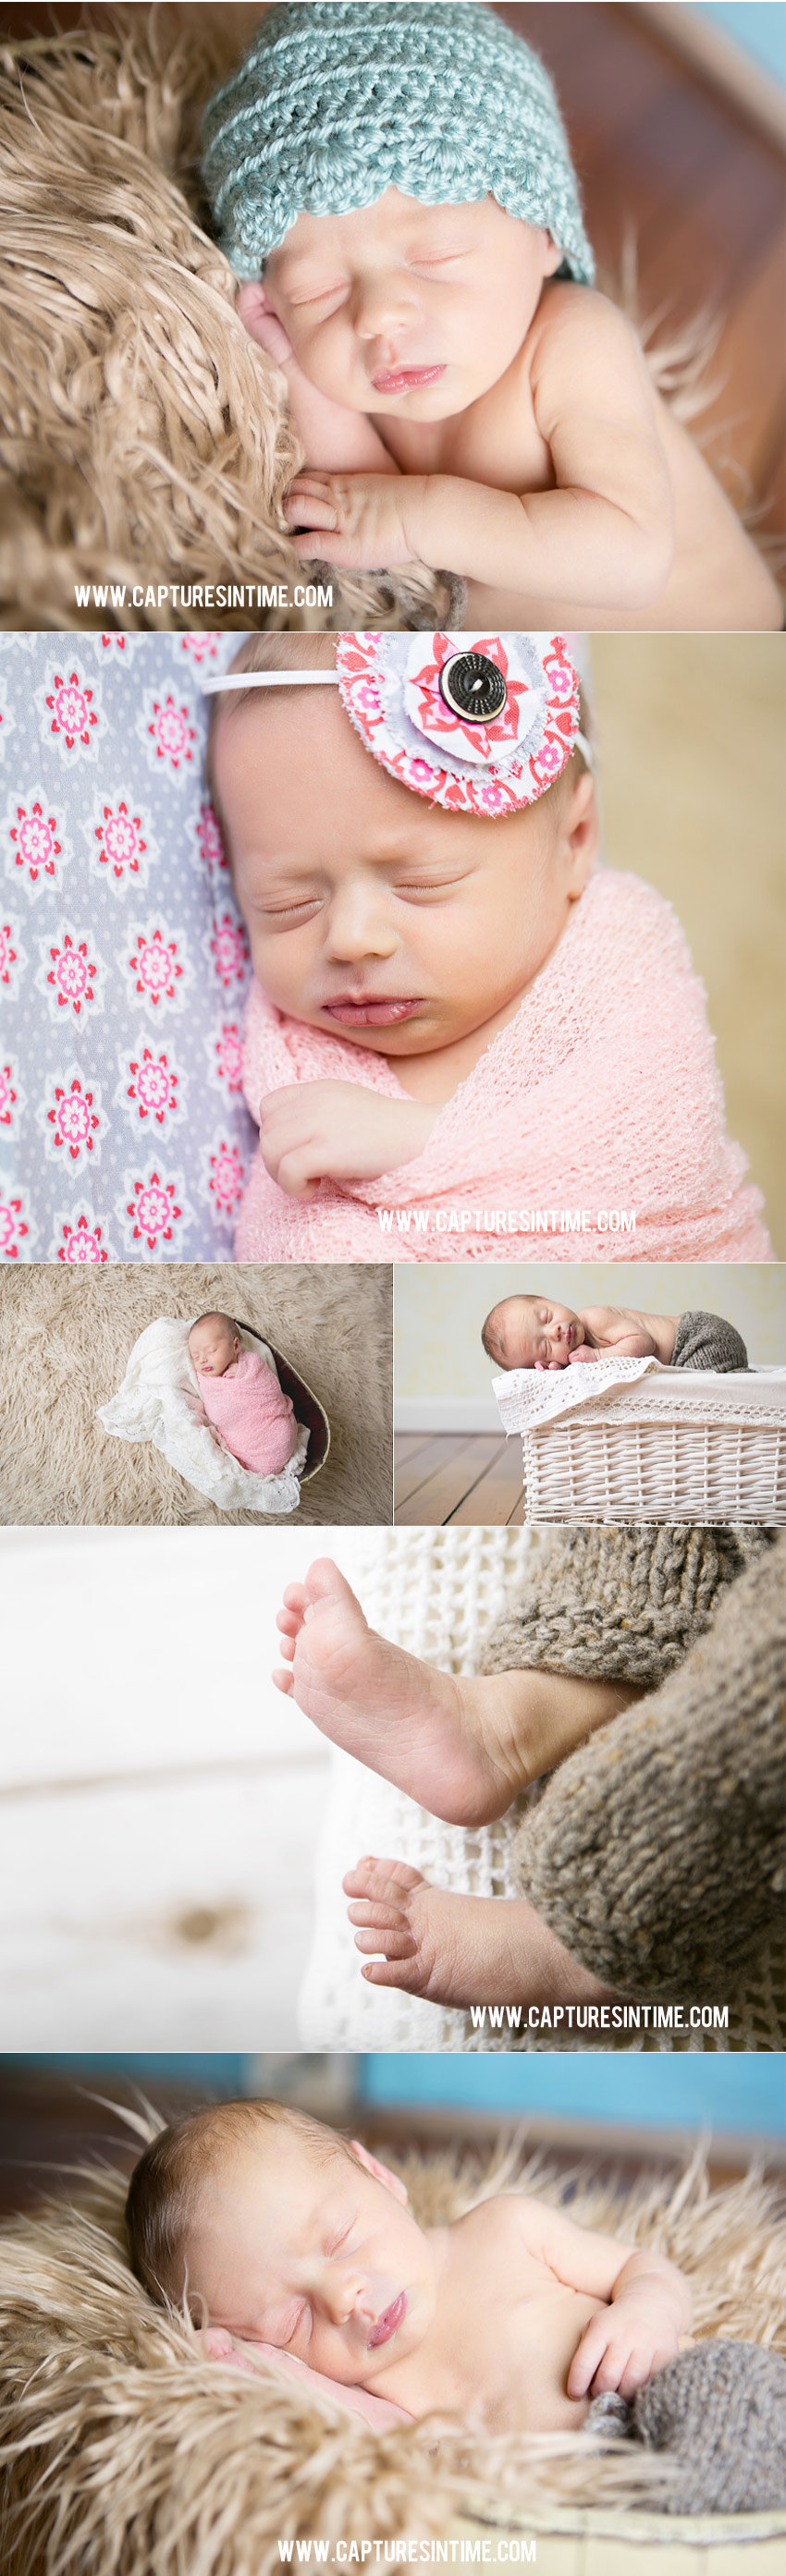 Grain Valley Newborn Photography newborn baby with teal hat and Amy Butler fabrics